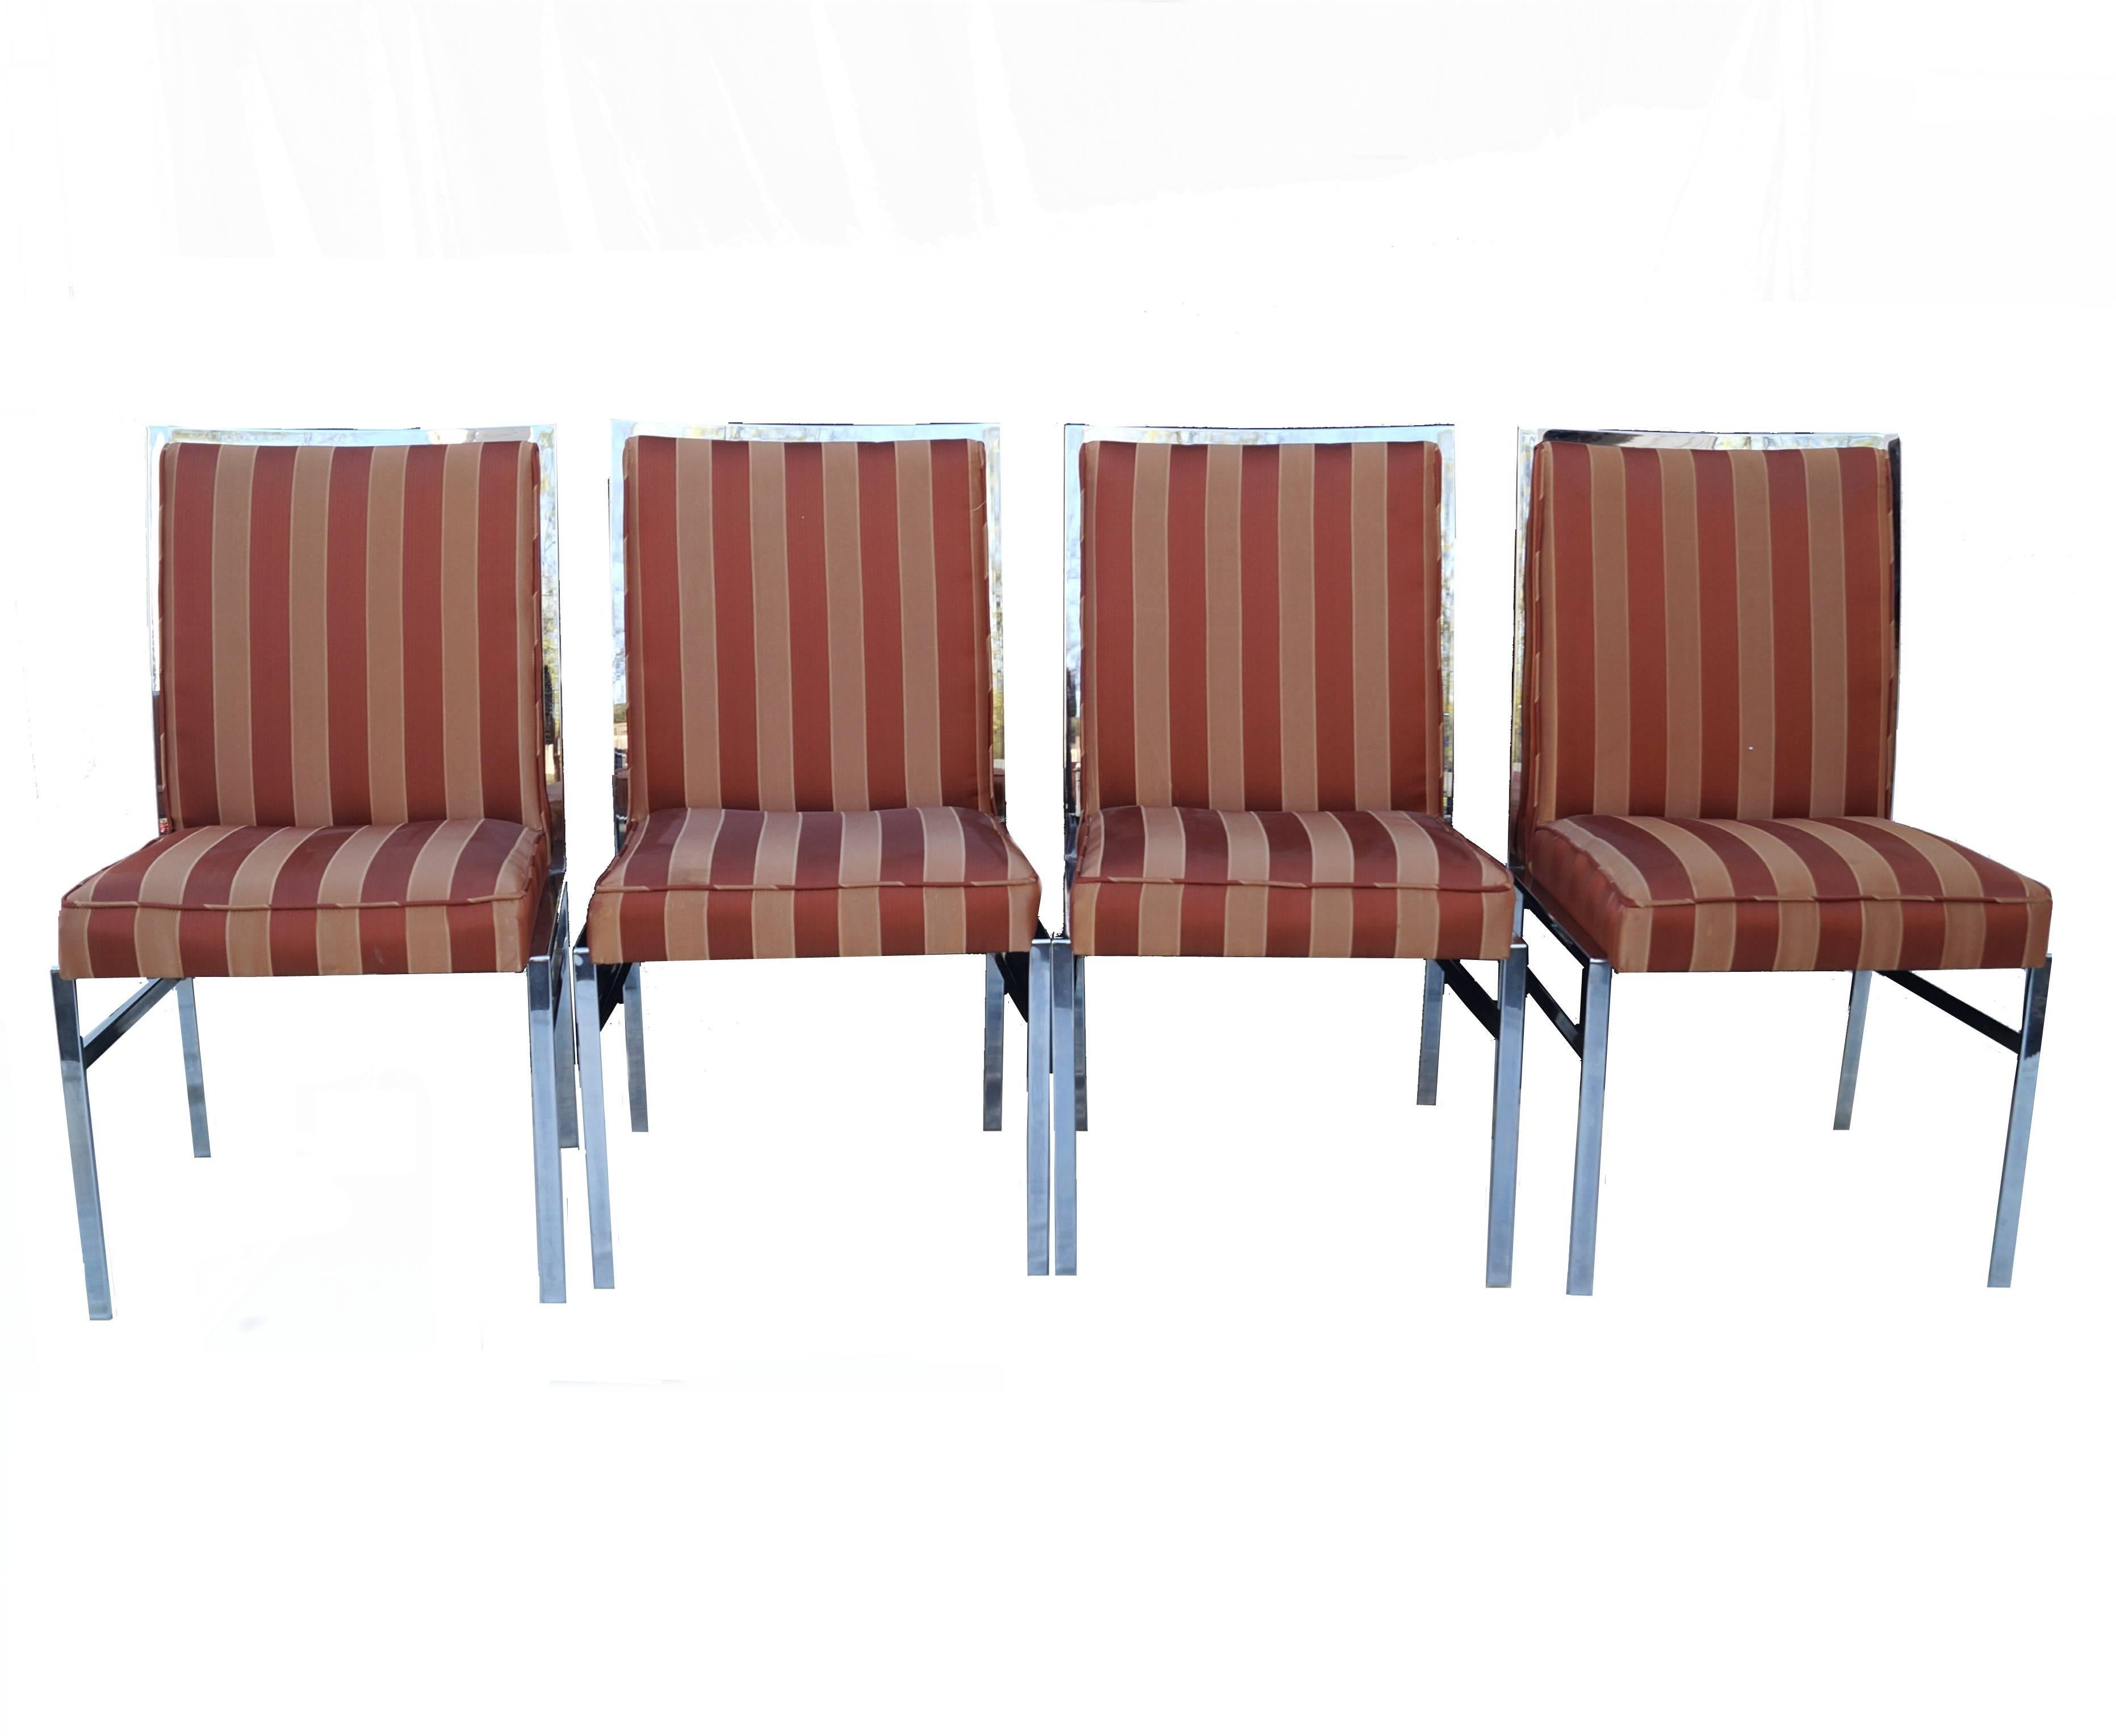 Four side, two arm or head chairs
Armchairs measure 20 1/8